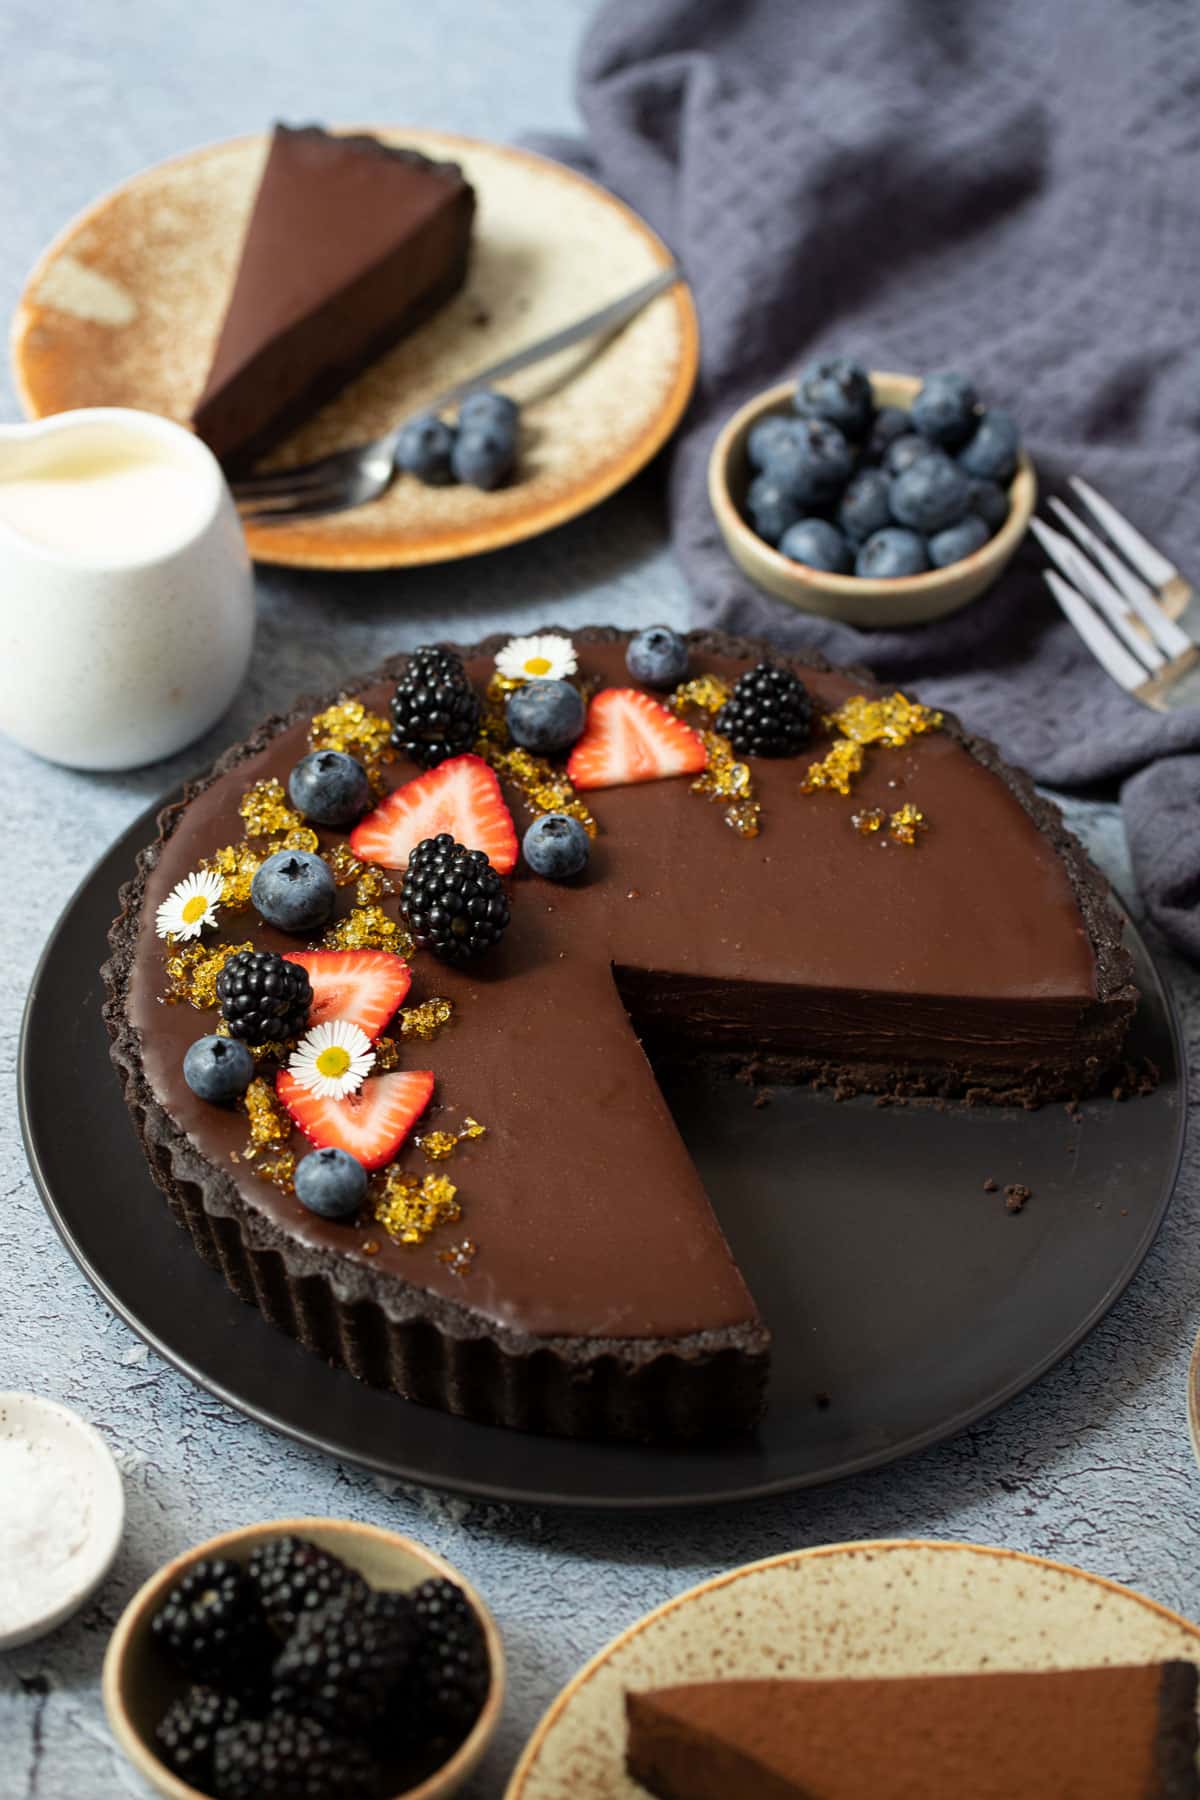 finished chocolate tart on a table, topped with berries.